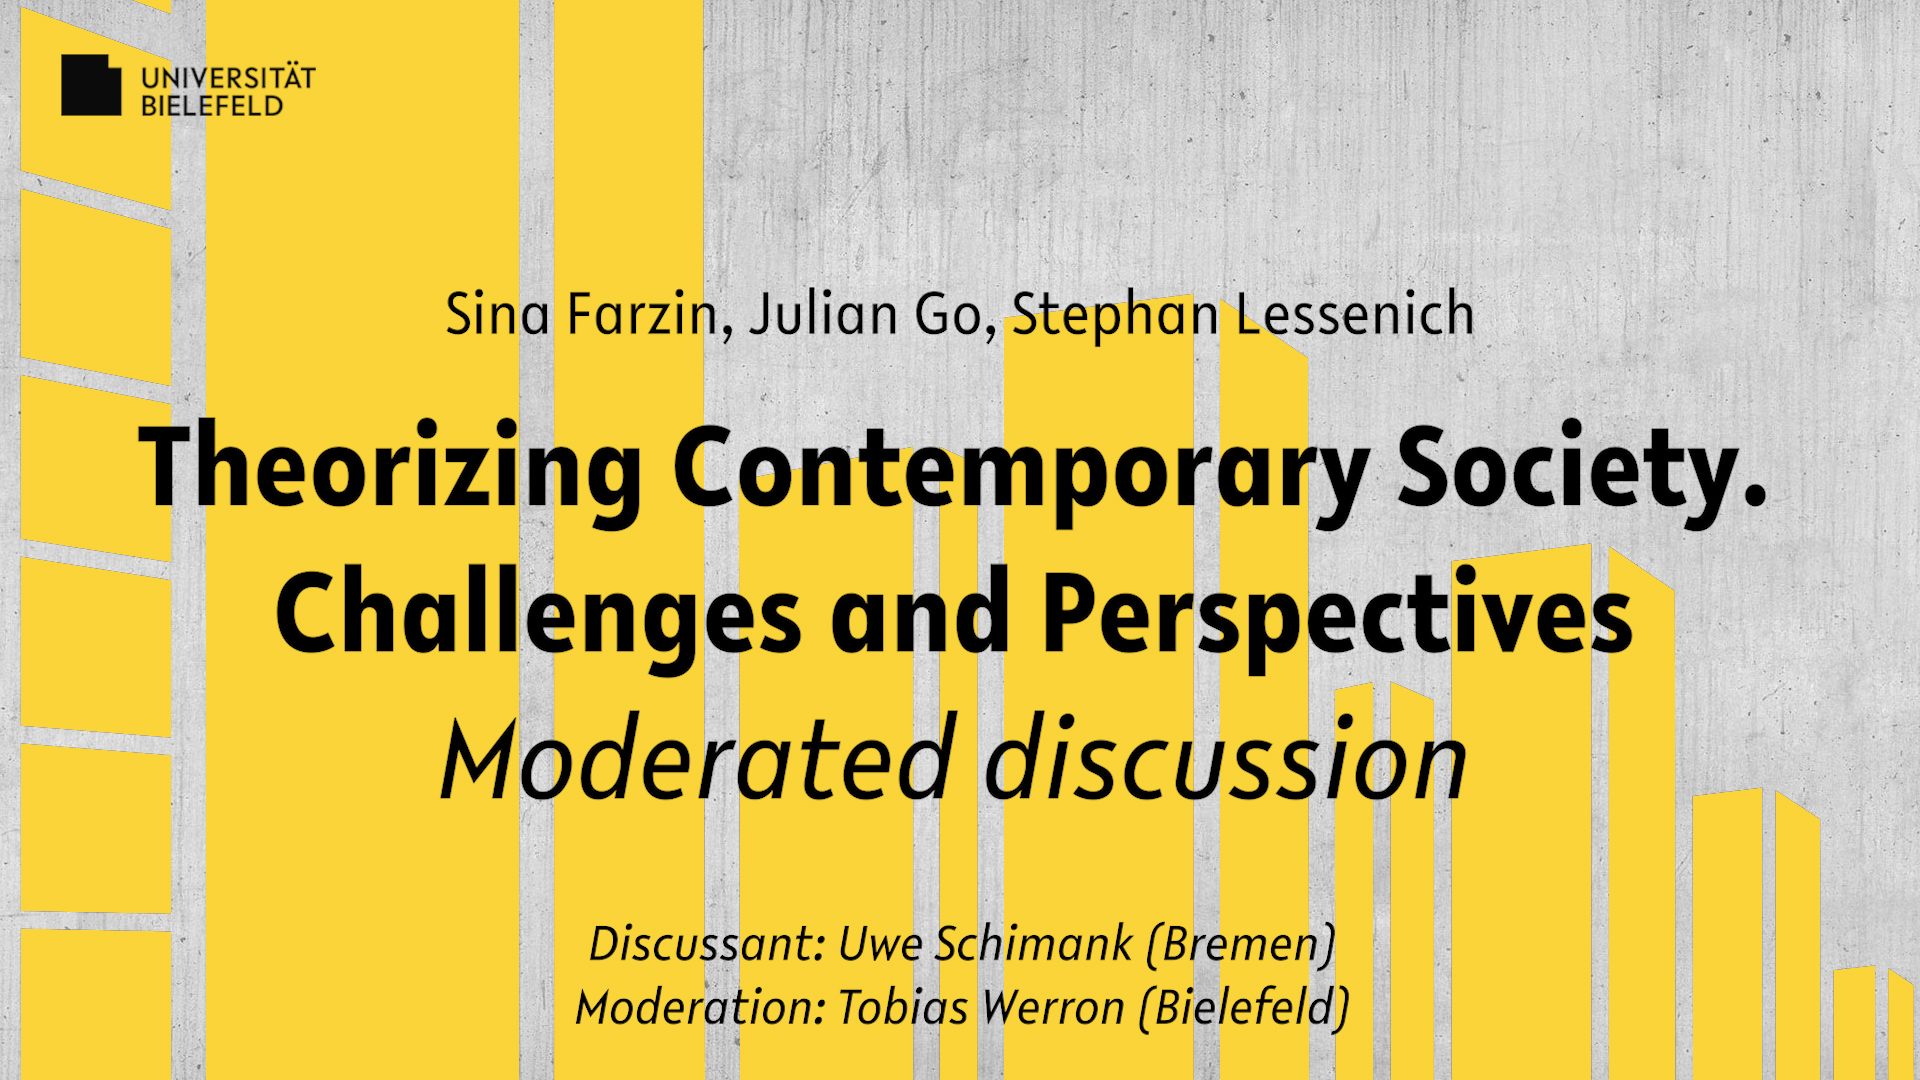 Theorizing Contemporary Society. Challenges and Perspectives